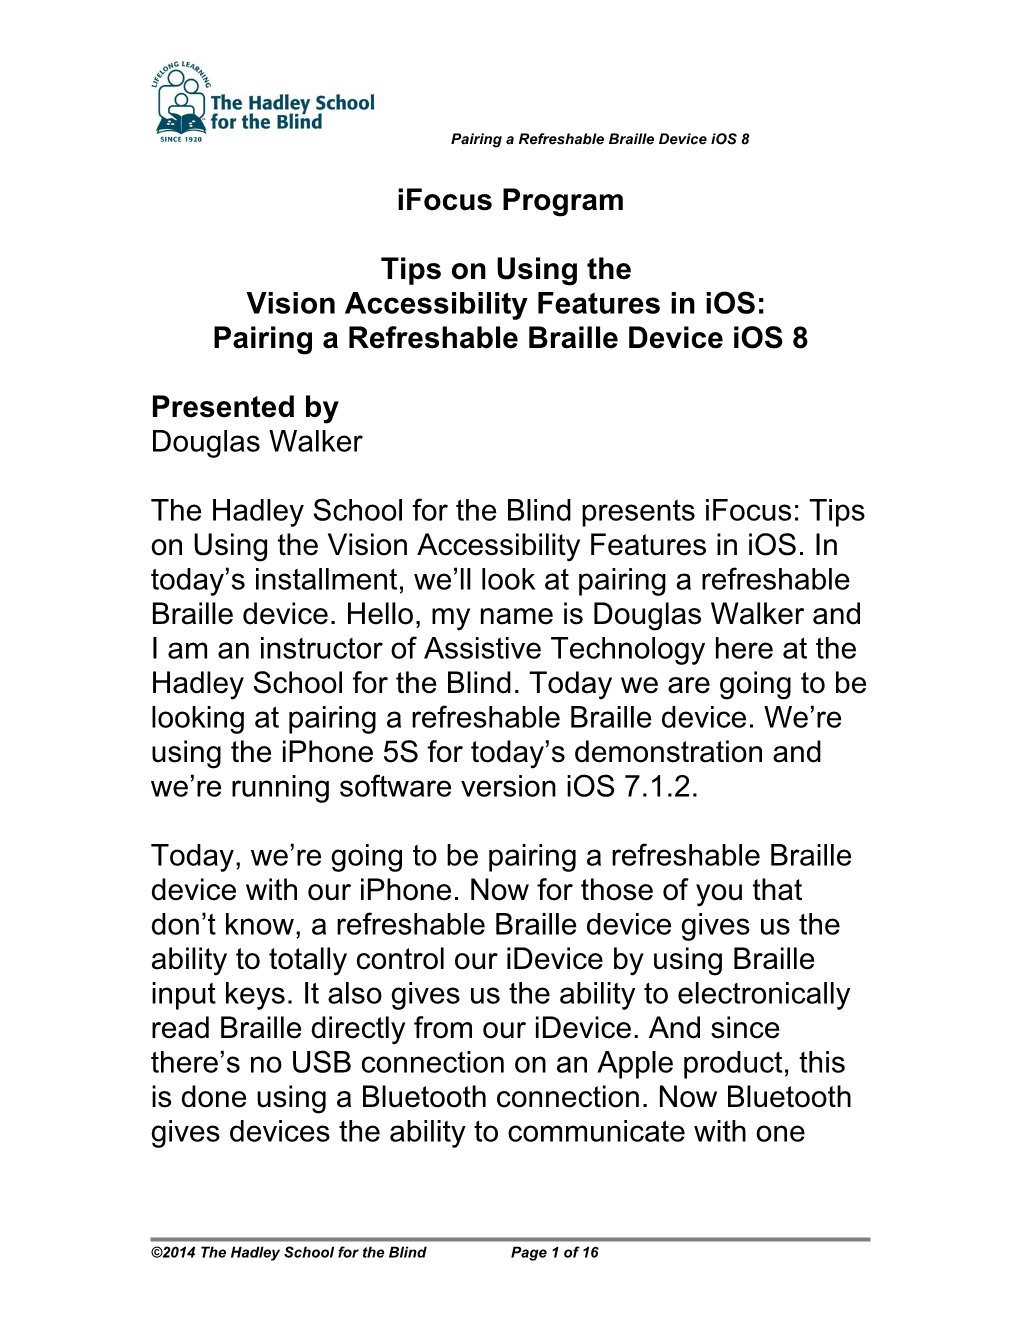 Tips on Using the Vision Accessibility Features in Ios: Pairing a Refreshable Braille